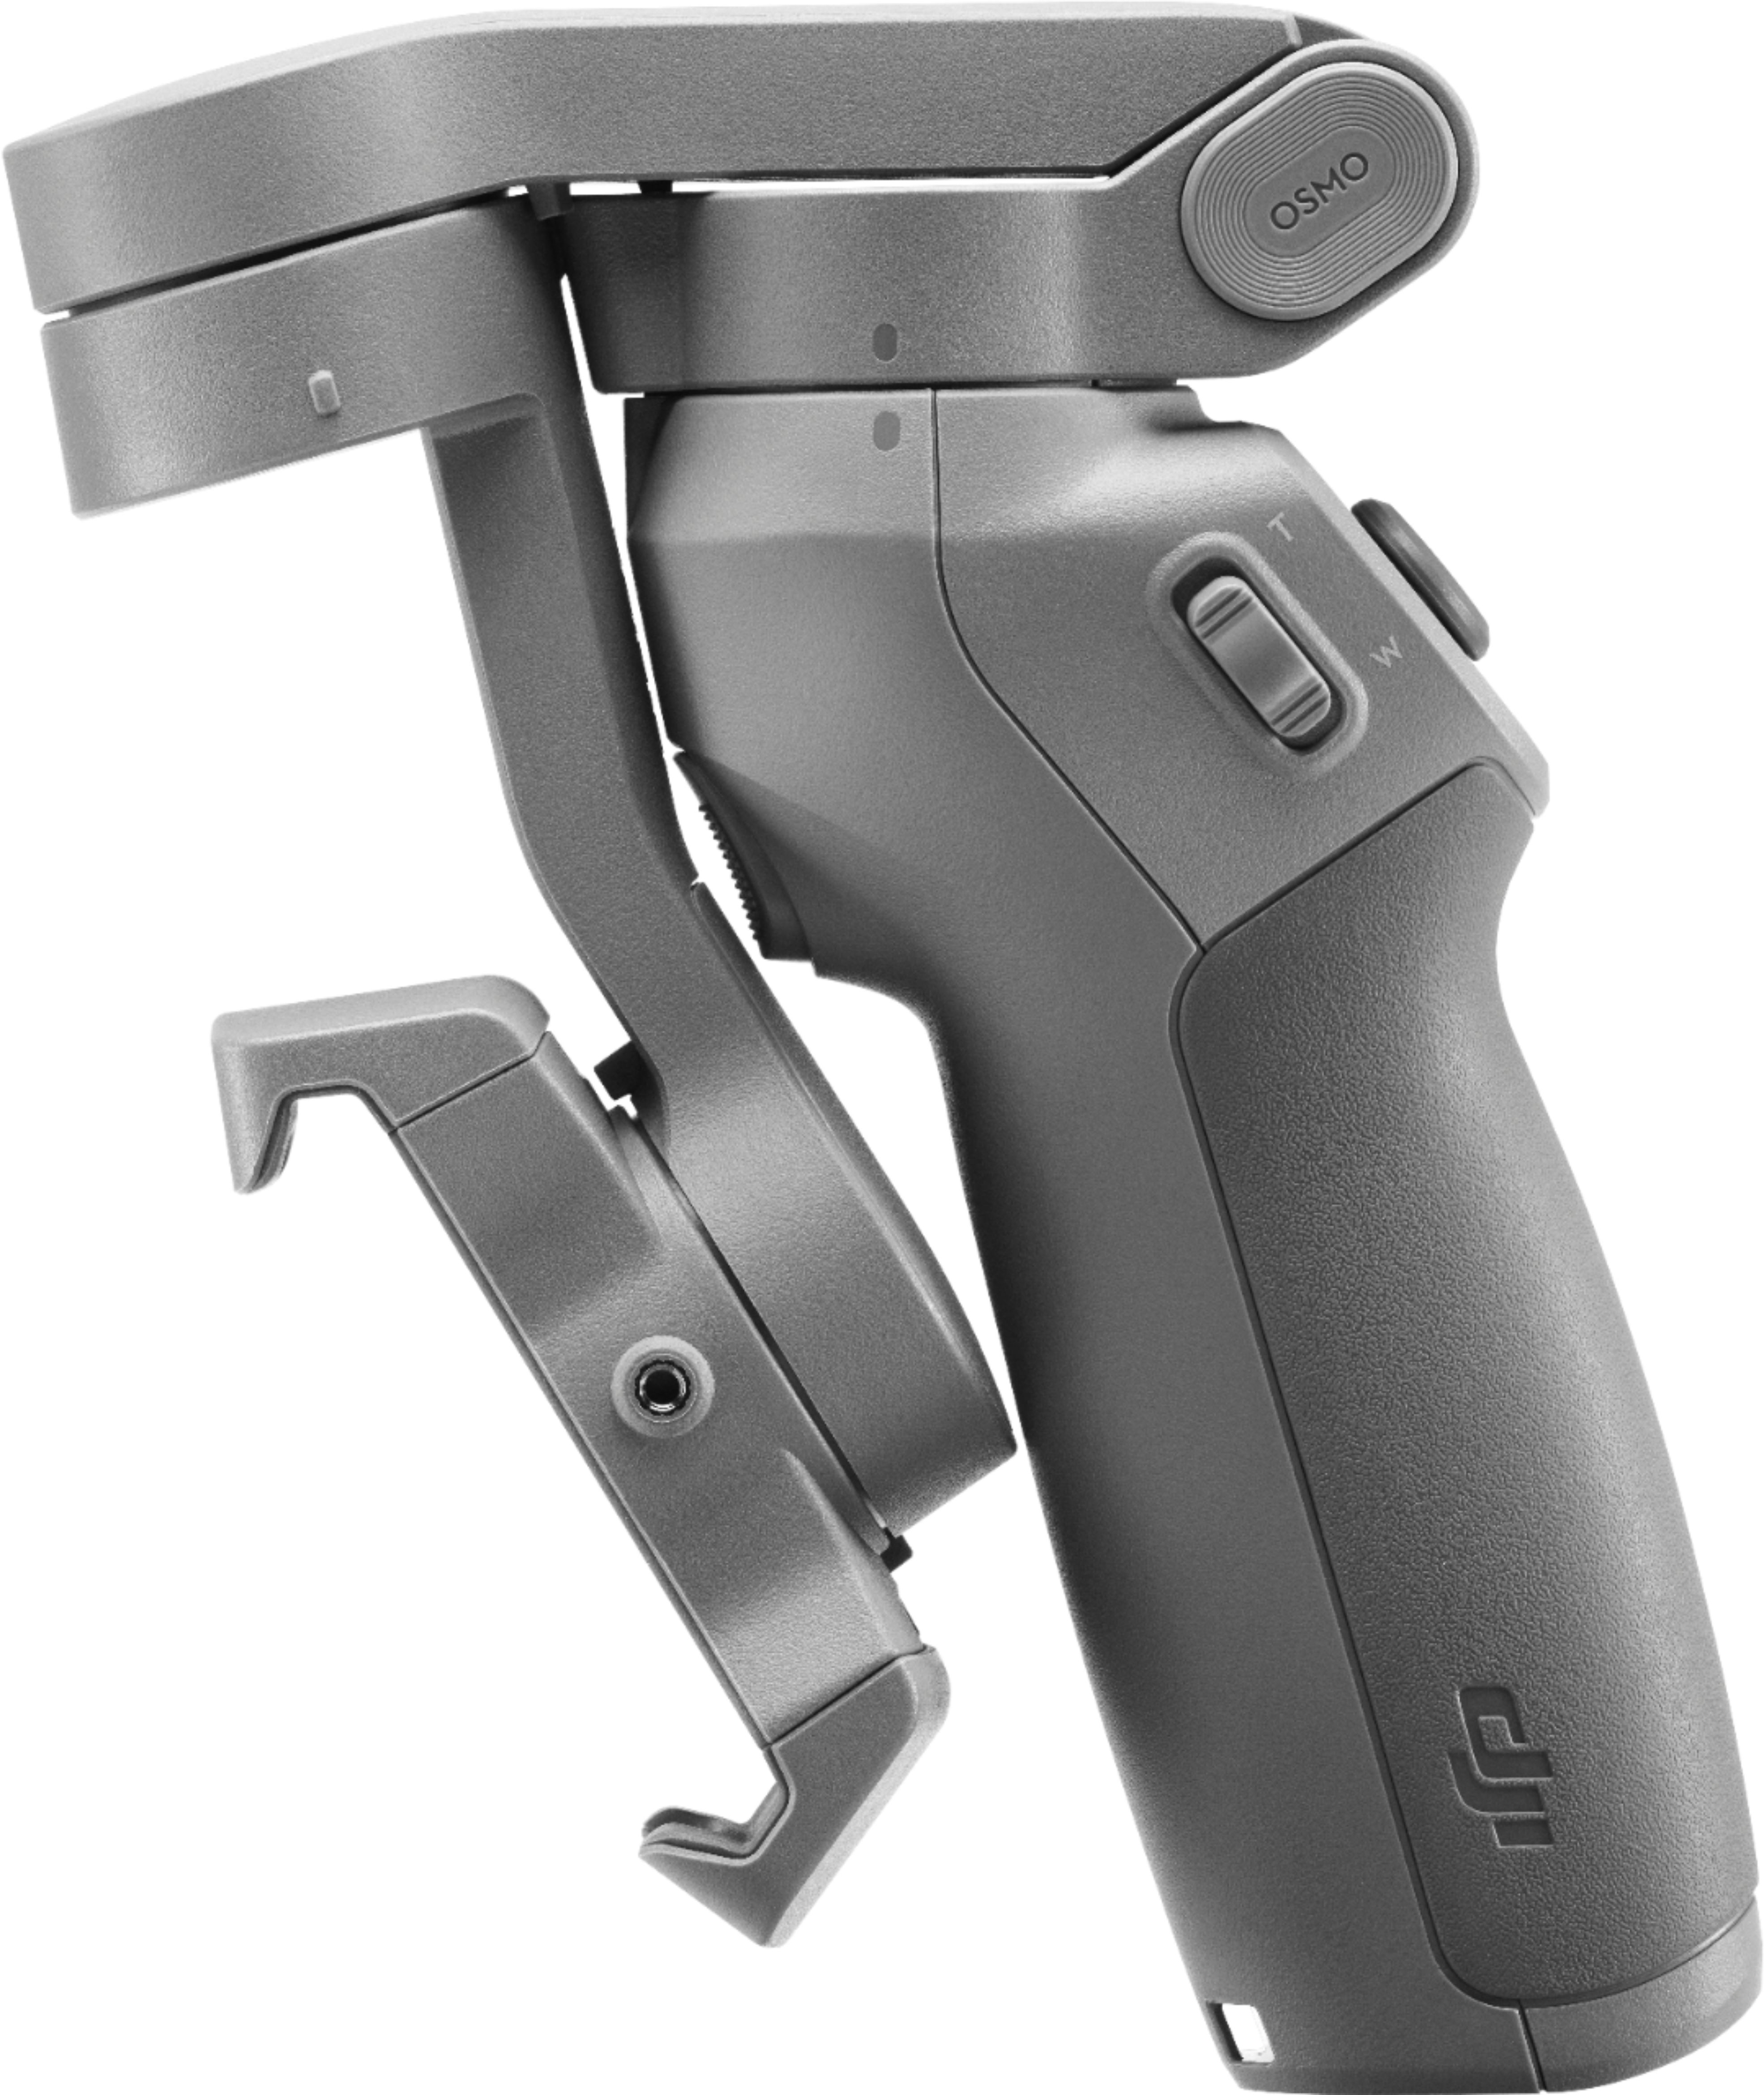 Best Buy: DJI Osmo Mobile 3 3-Axis Gimbal Stabilizer for Mobile